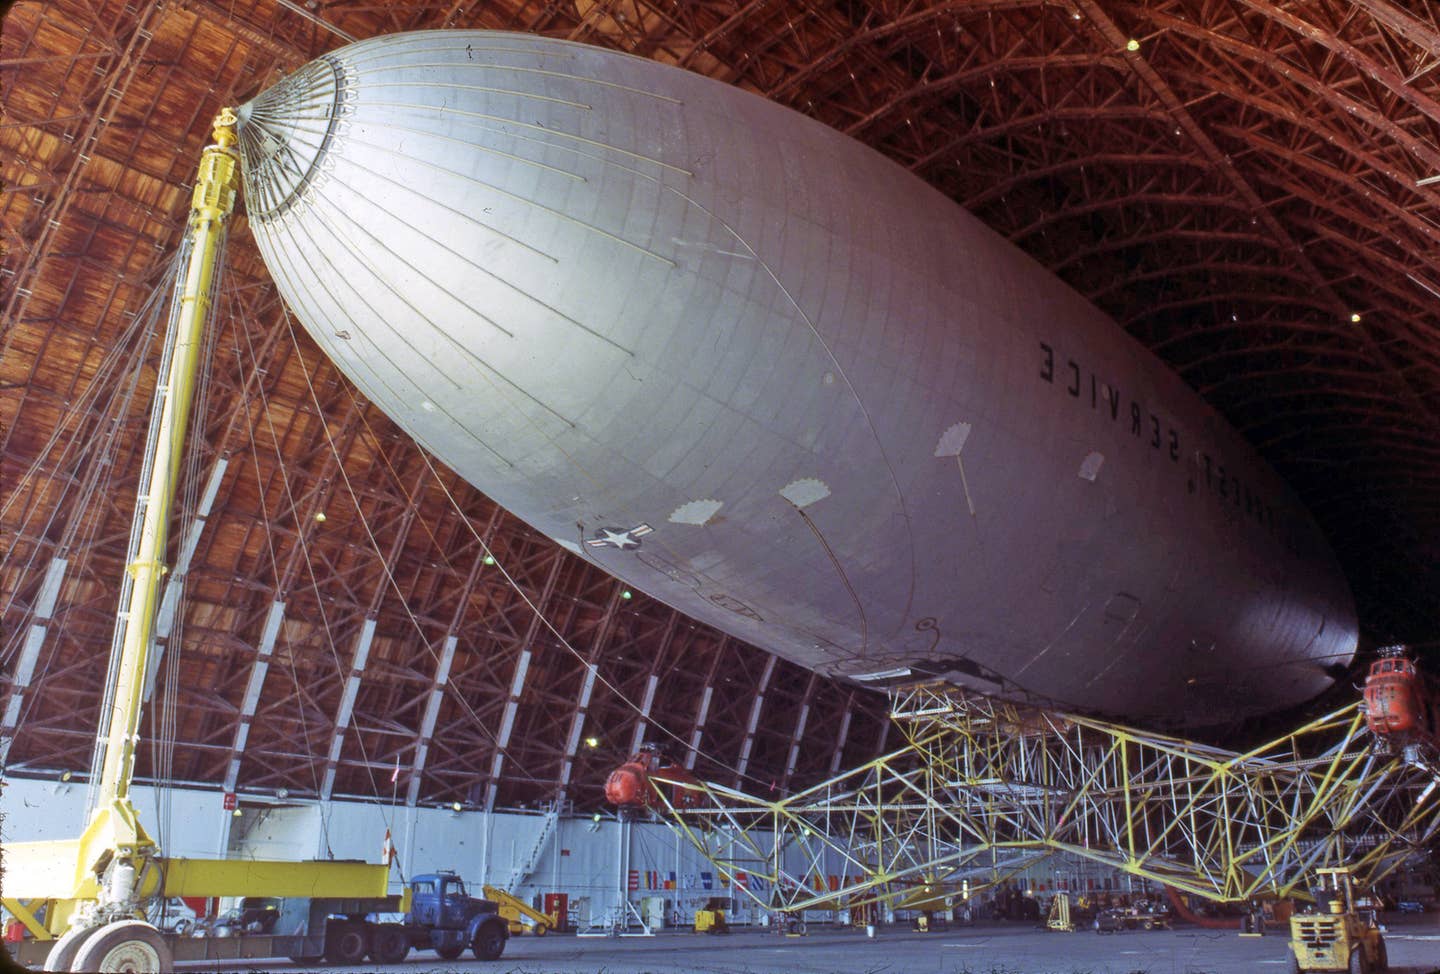 The PA-97 Helistat prototype in its final form as it appeared inside a hangar. <em>Credit: Joint Base McGuire-Dix-Lakehurst</em>